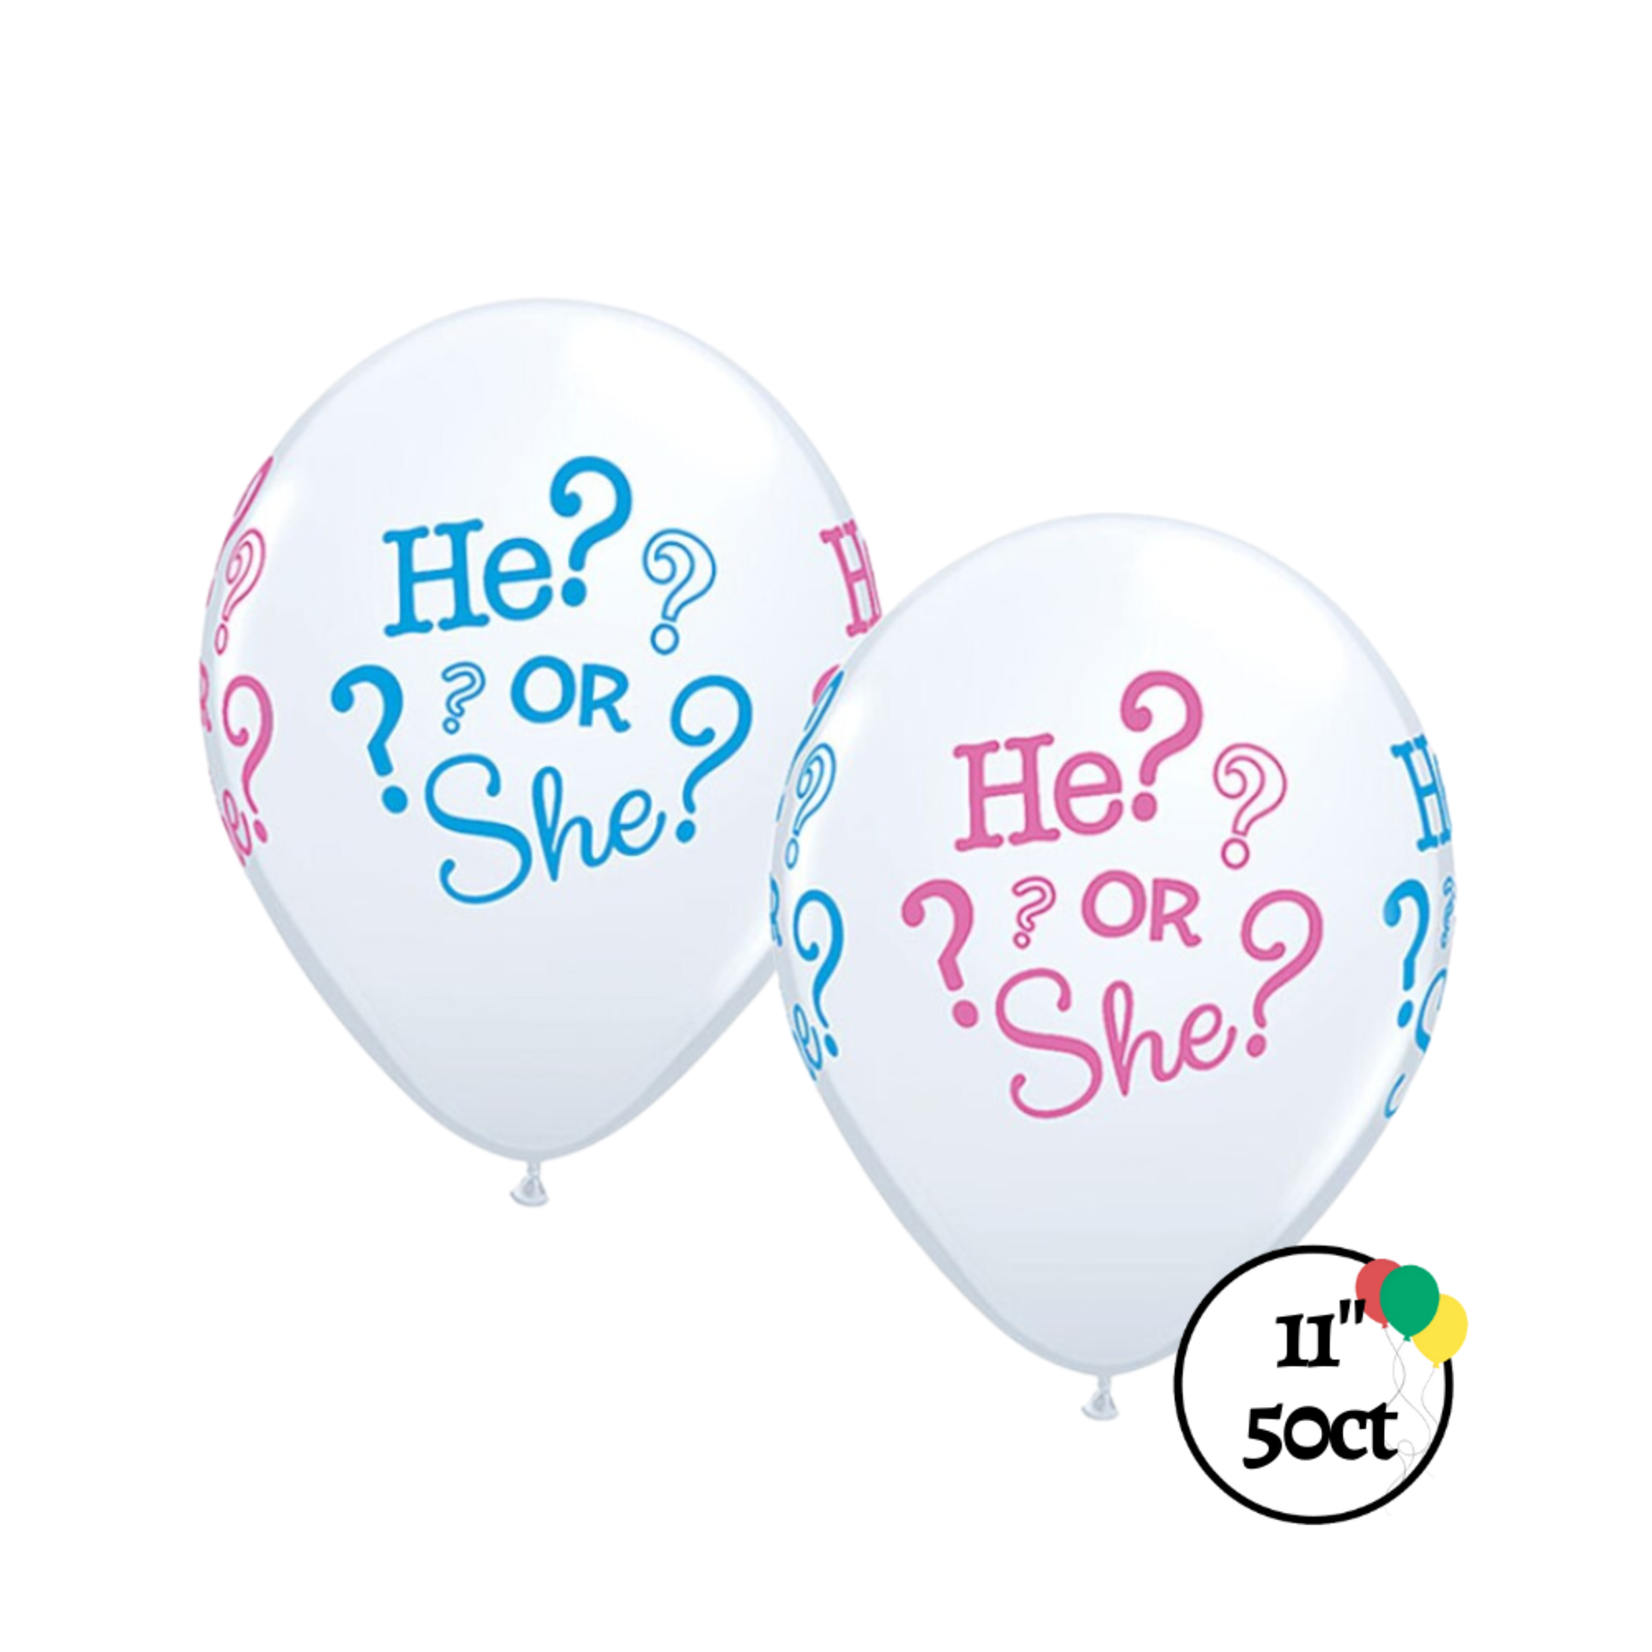 Qualatex Qualatex He or She Gender Reveal Balloons 11" 50ct